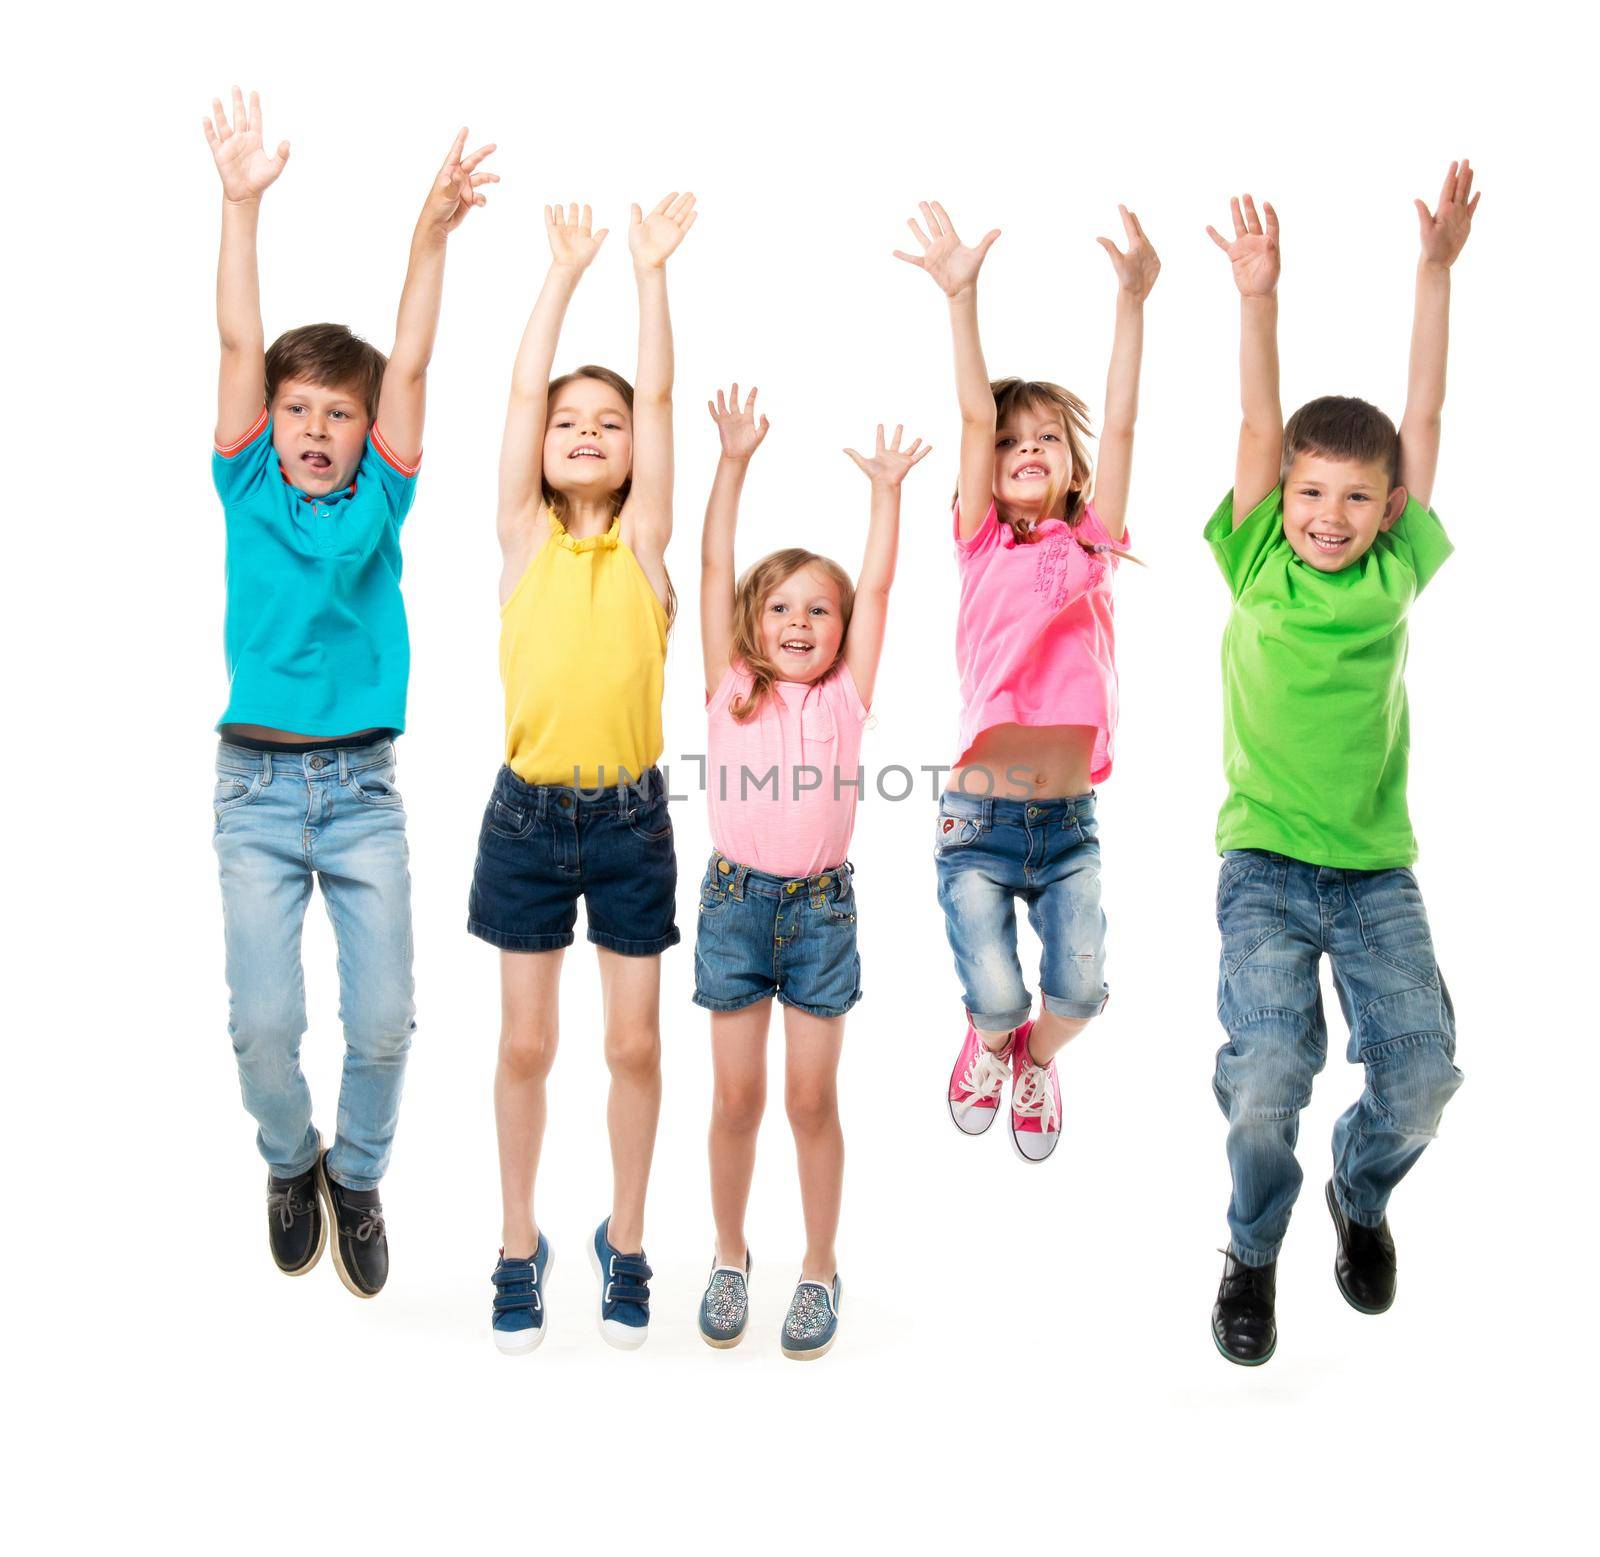 beautiful children in colorful clothes jumping together with hands up isolated on white background